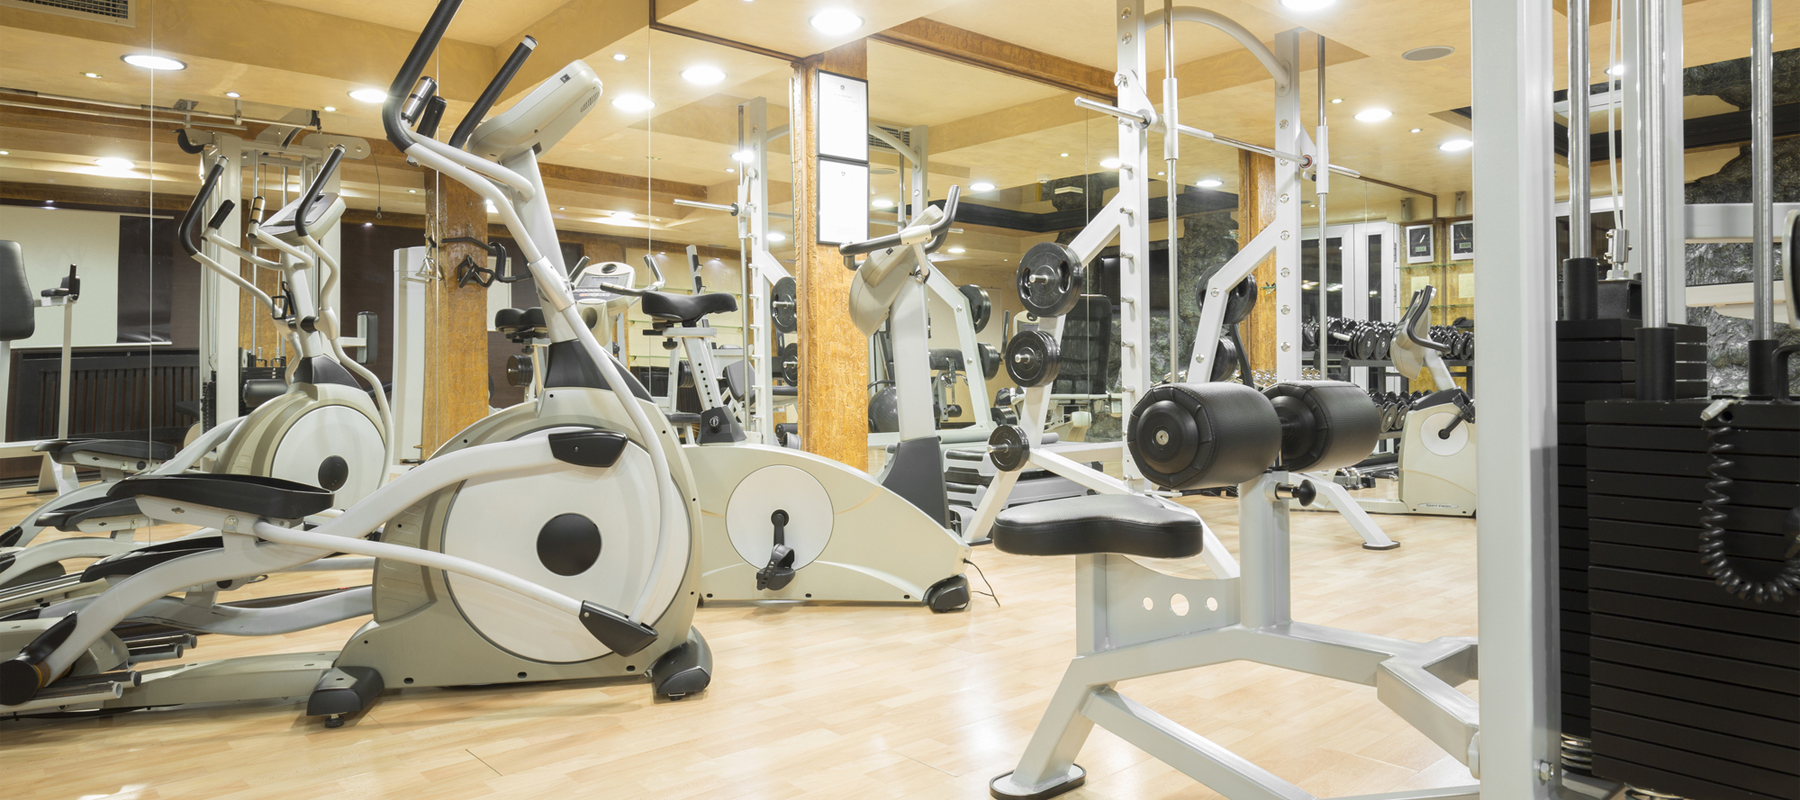 A Modern Gym that Leases it's Equipment